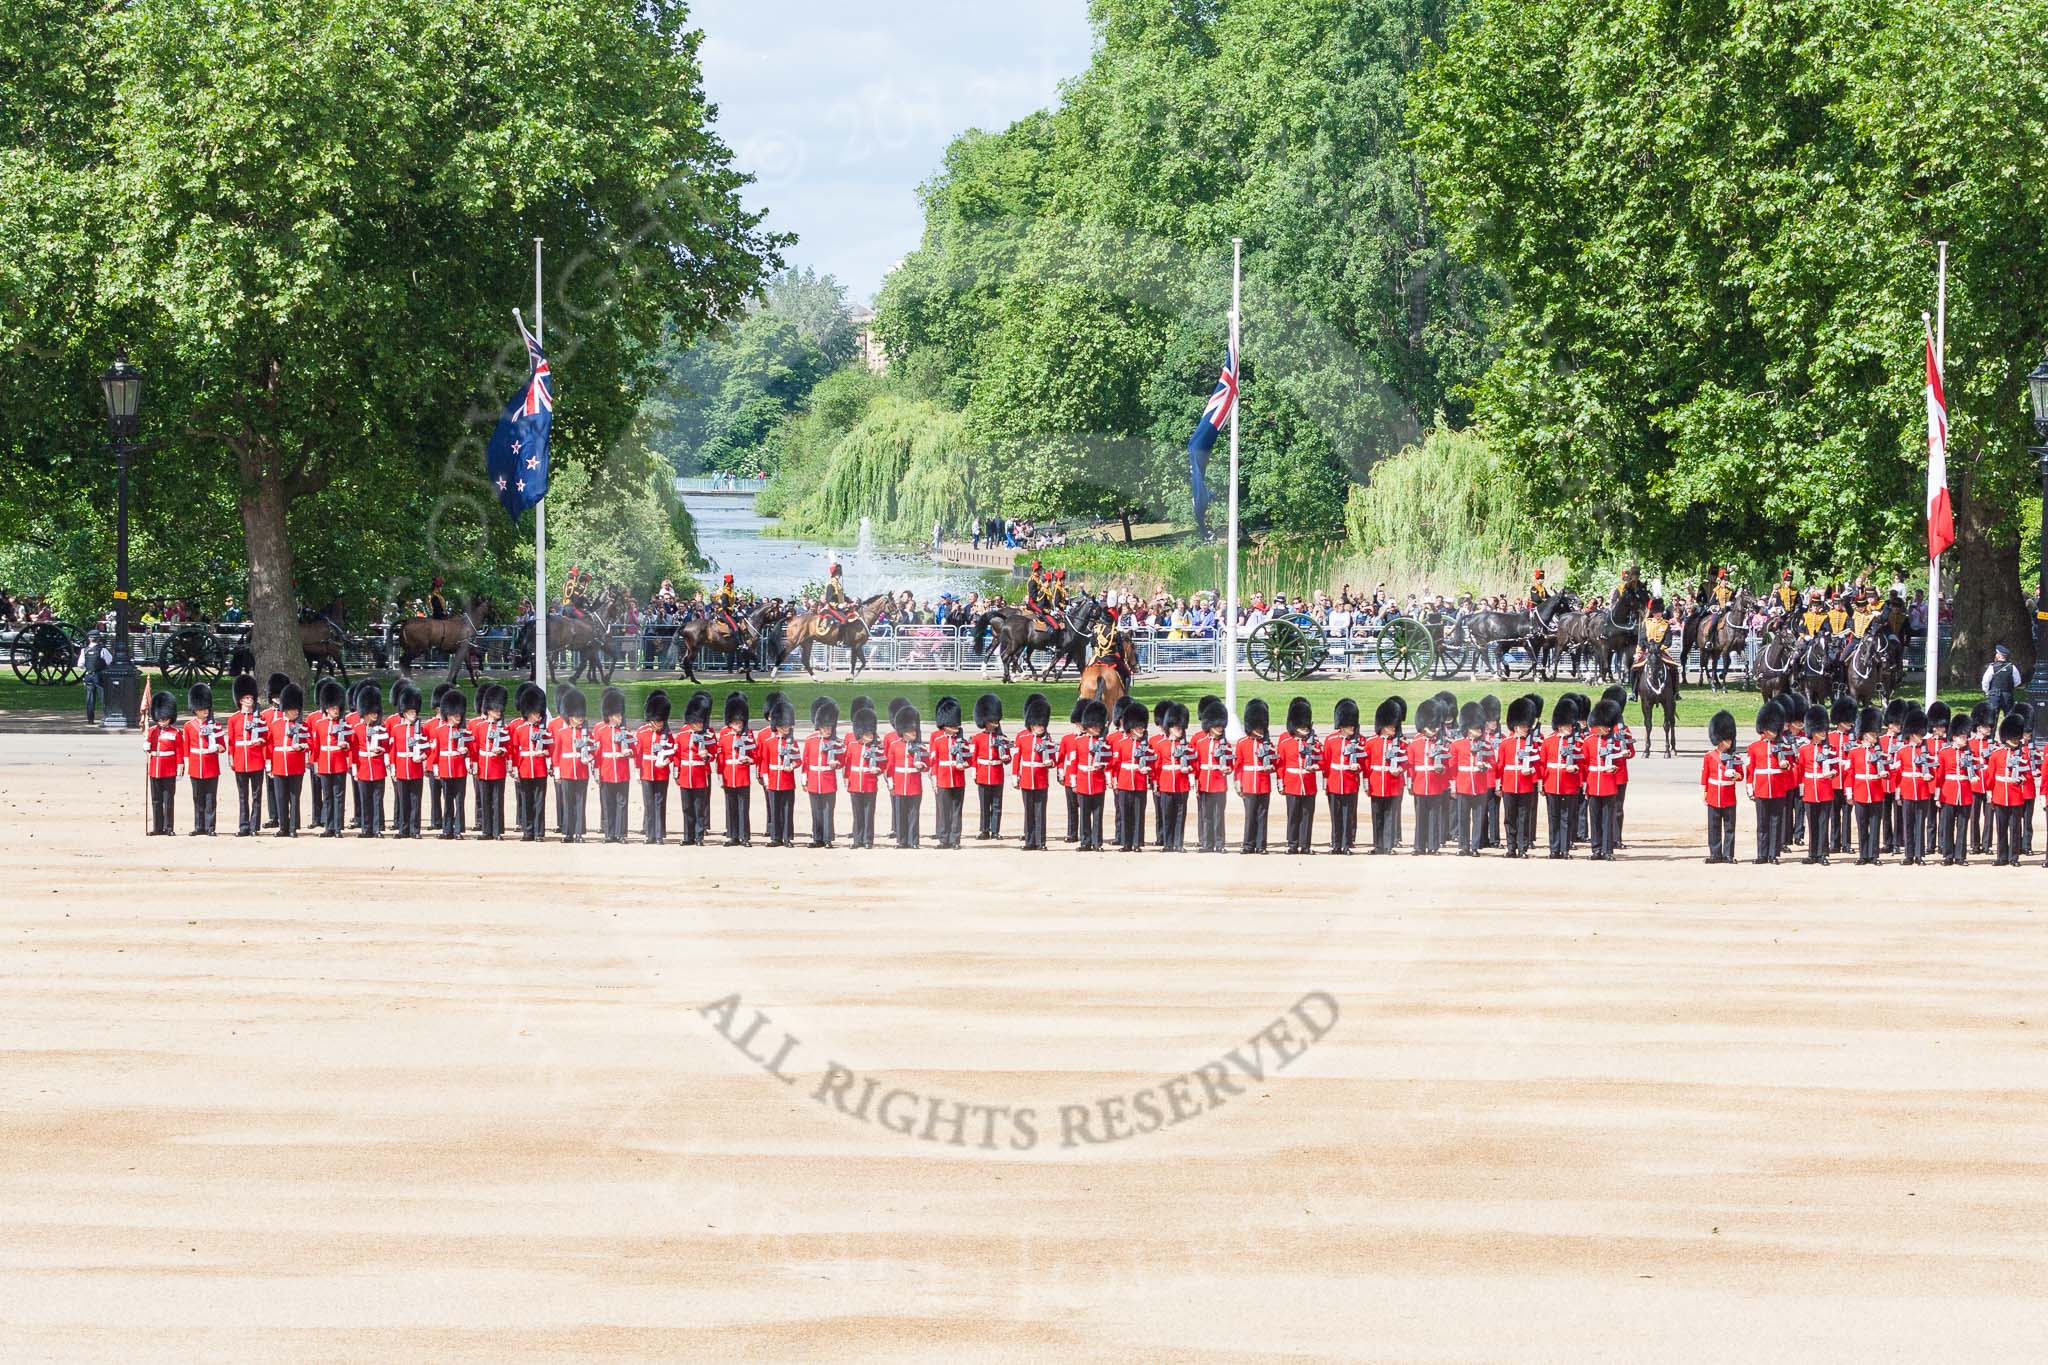 The Colonel's Review 2015.
Horse Guards Parade, Westminster,
London,

United Kingdom,
on 06 June 2015 at 10:37, image #120